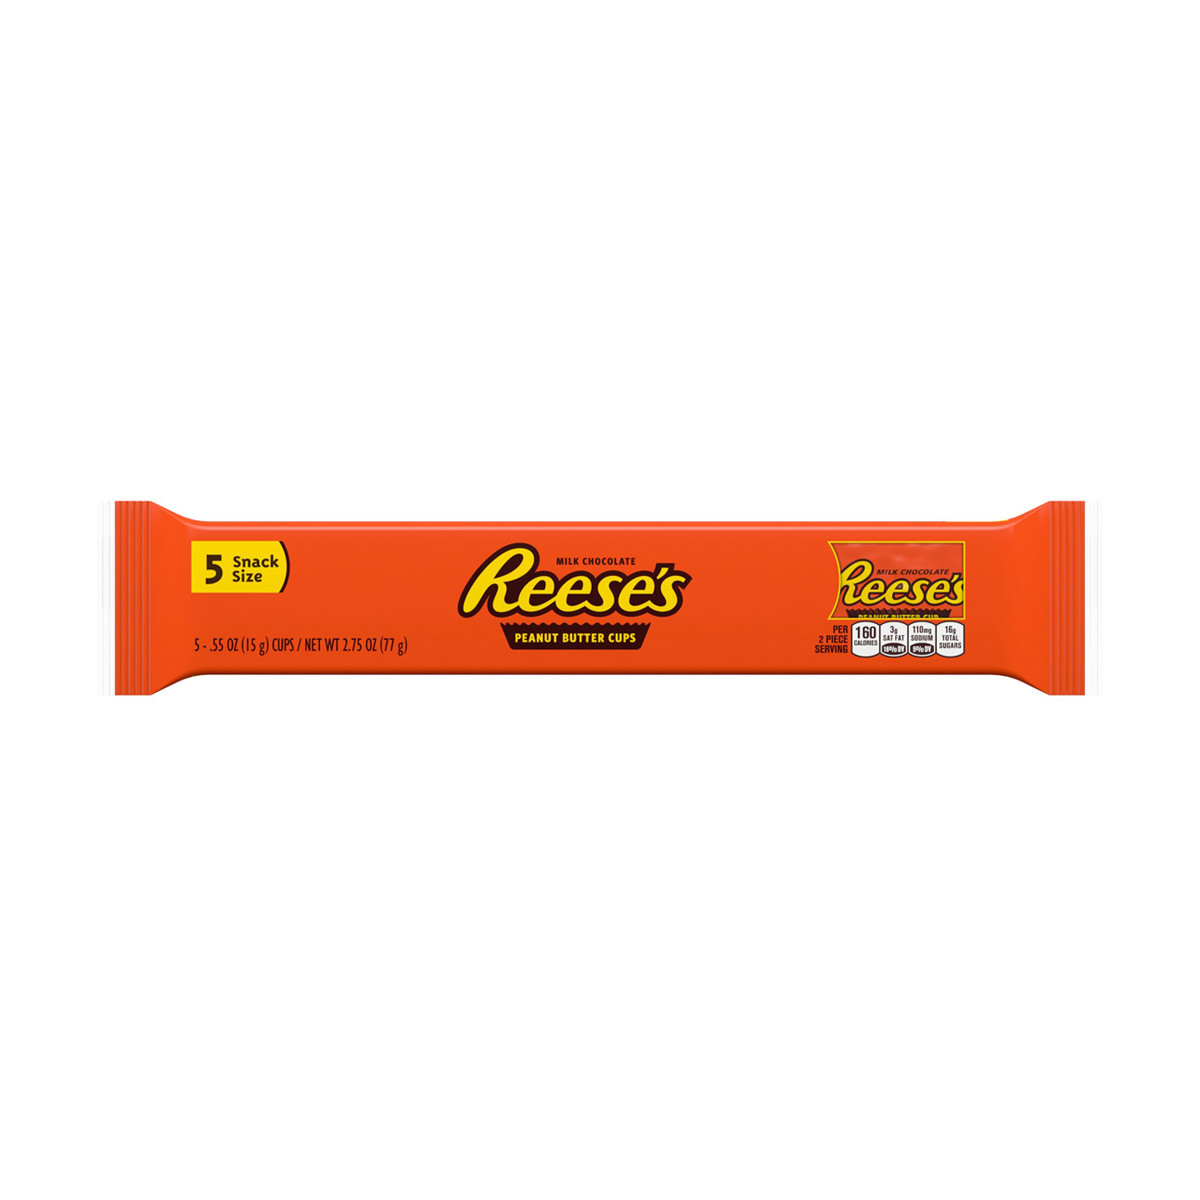 Reese's Snack Size Milk Chocolate Peanut Butter Cups, 5 Pack